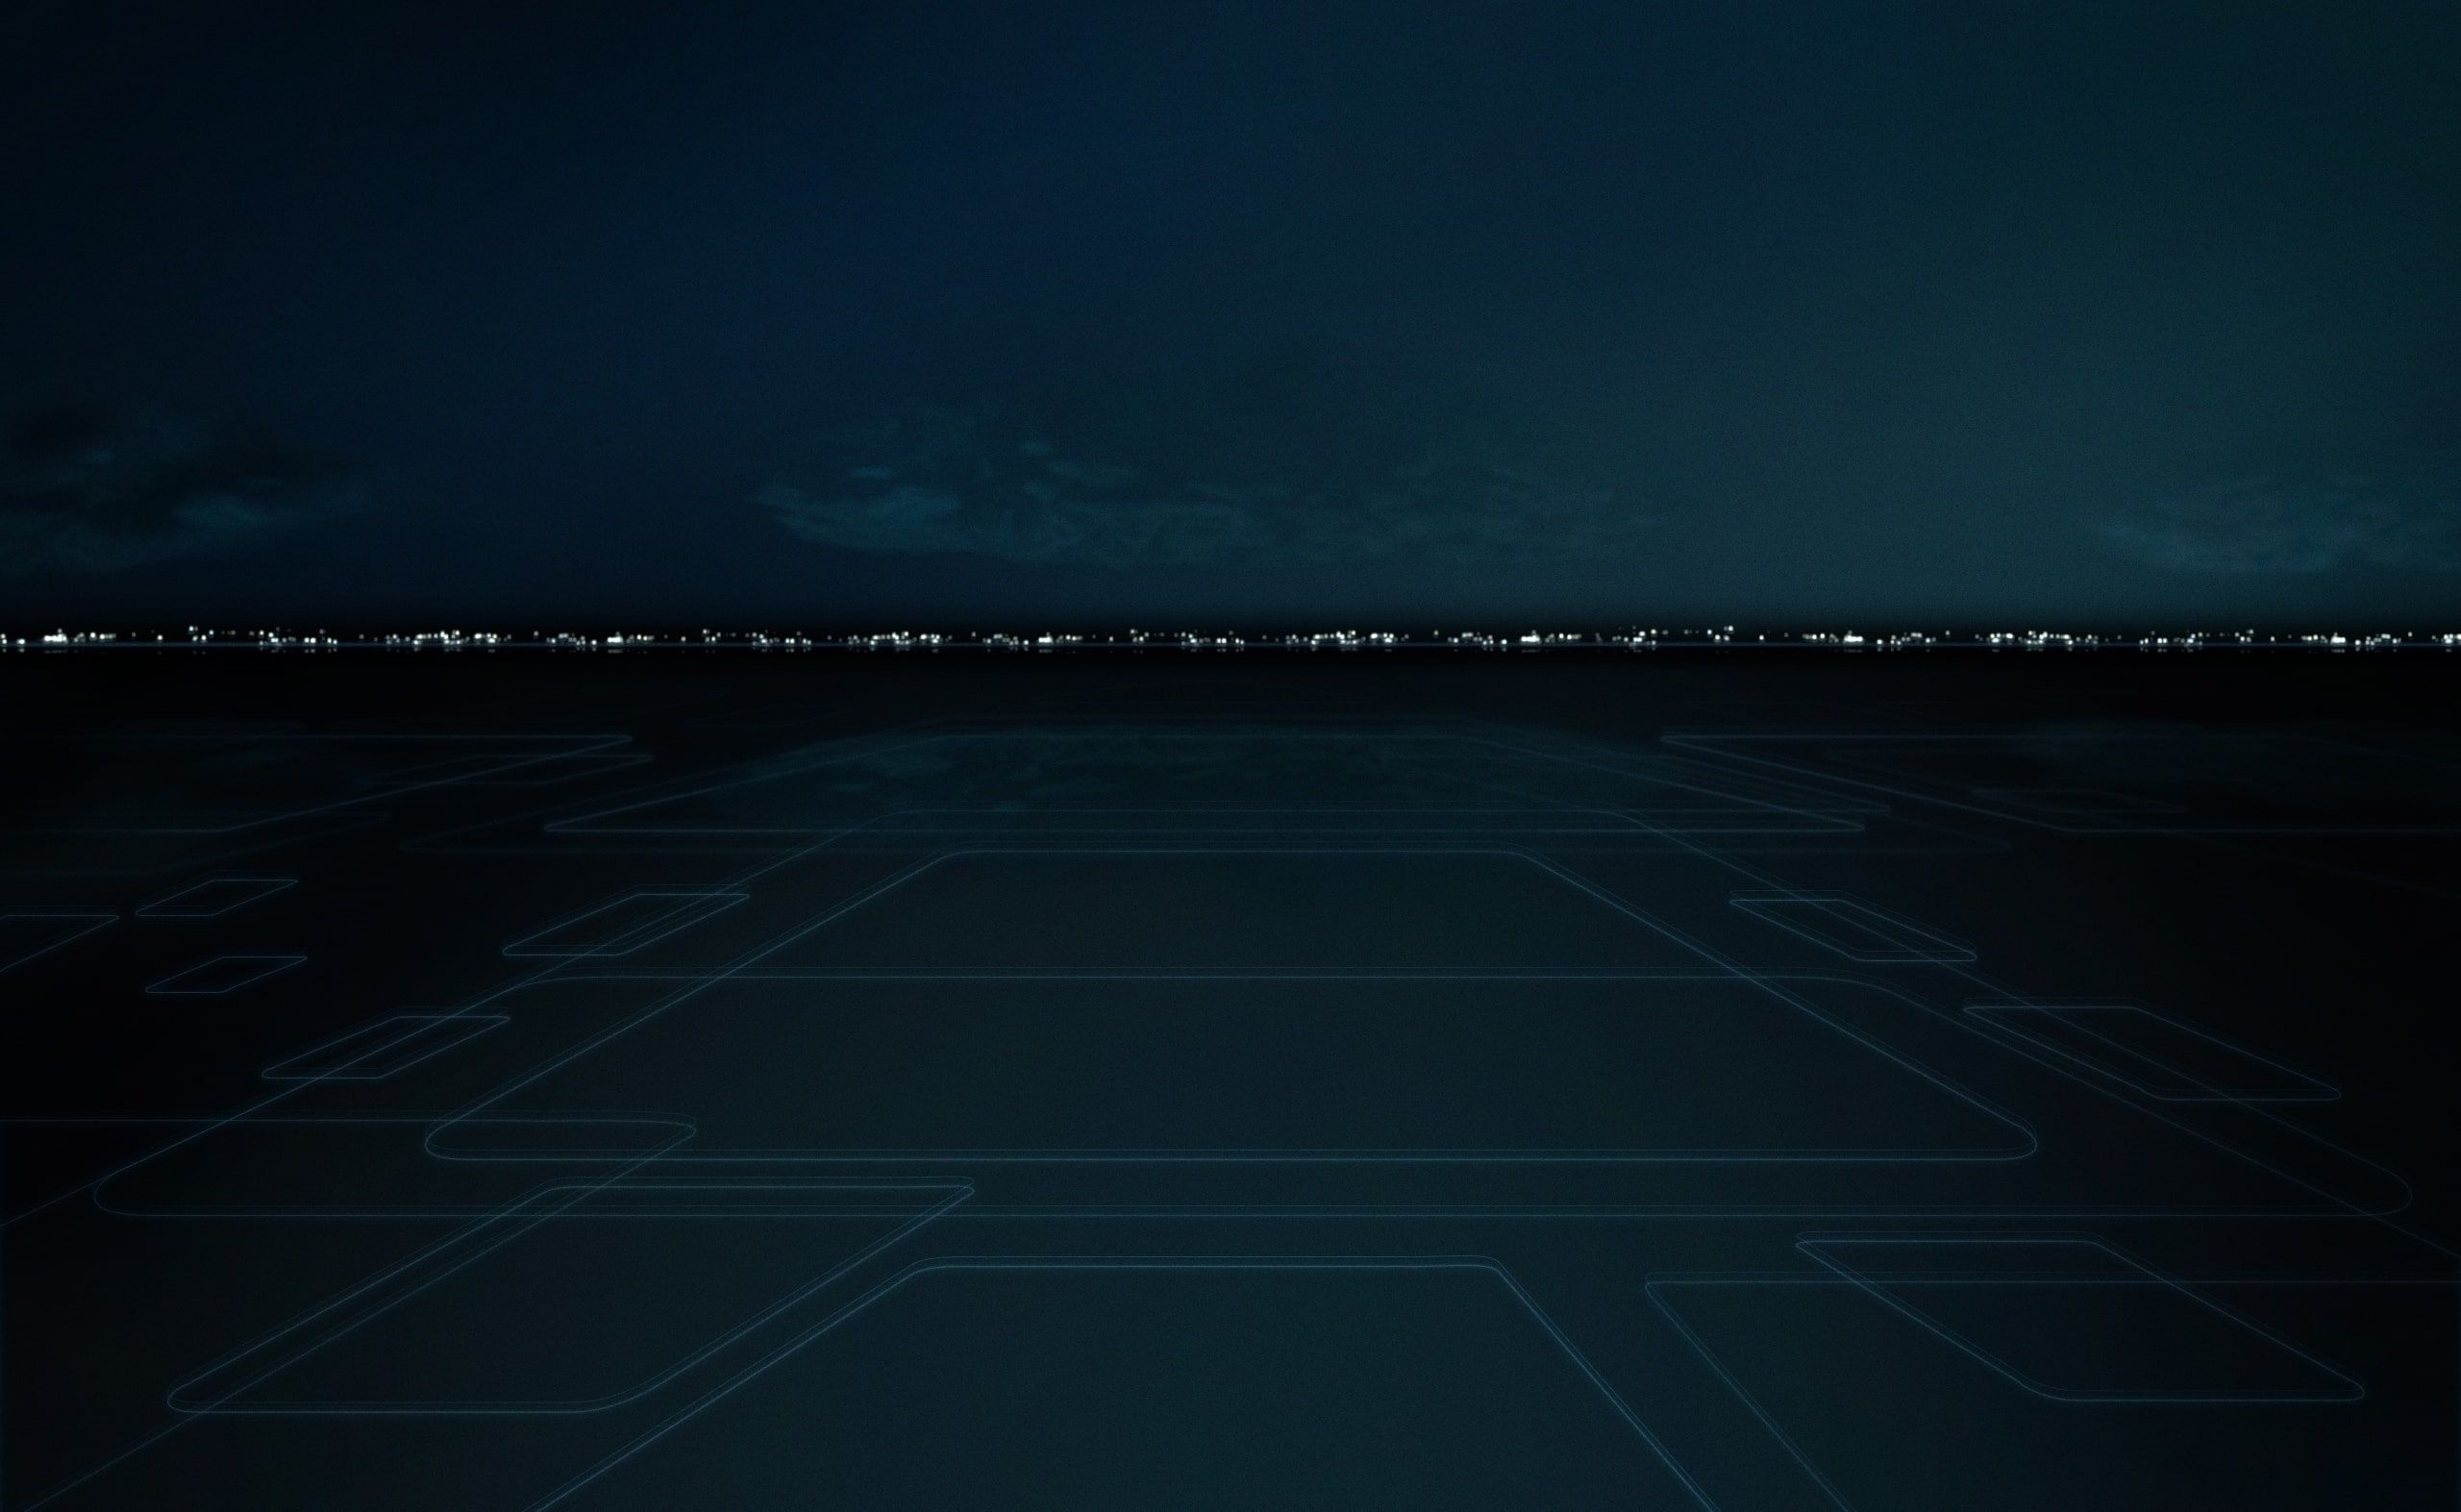 Tron (Movie): The film was theatrically released in the United States on December 17, 2010. 2560x1580 HD Wallpaper.